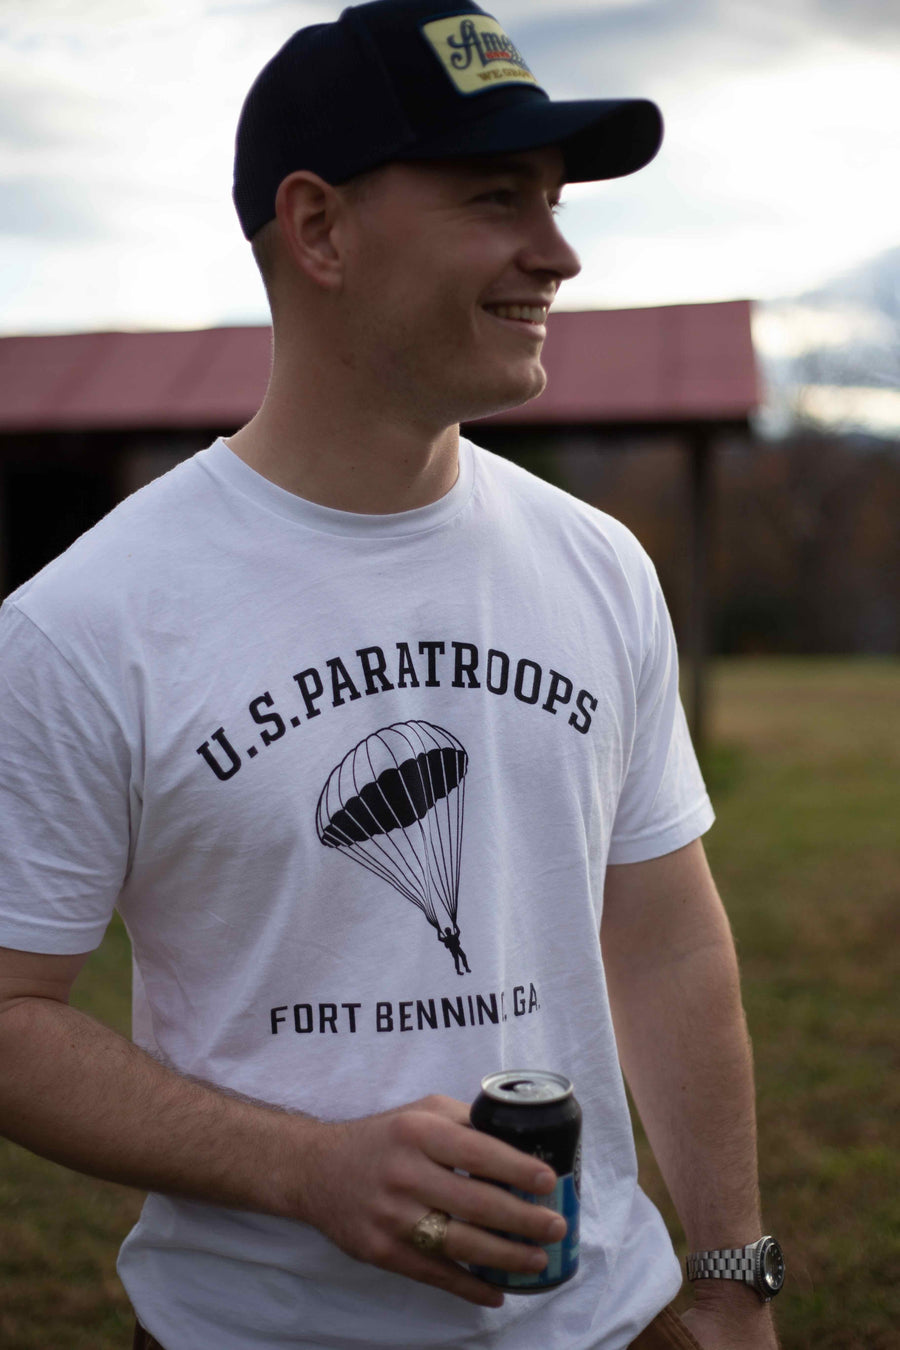 U.S. Paratroops T-Shirt Male Lifestyle Photo